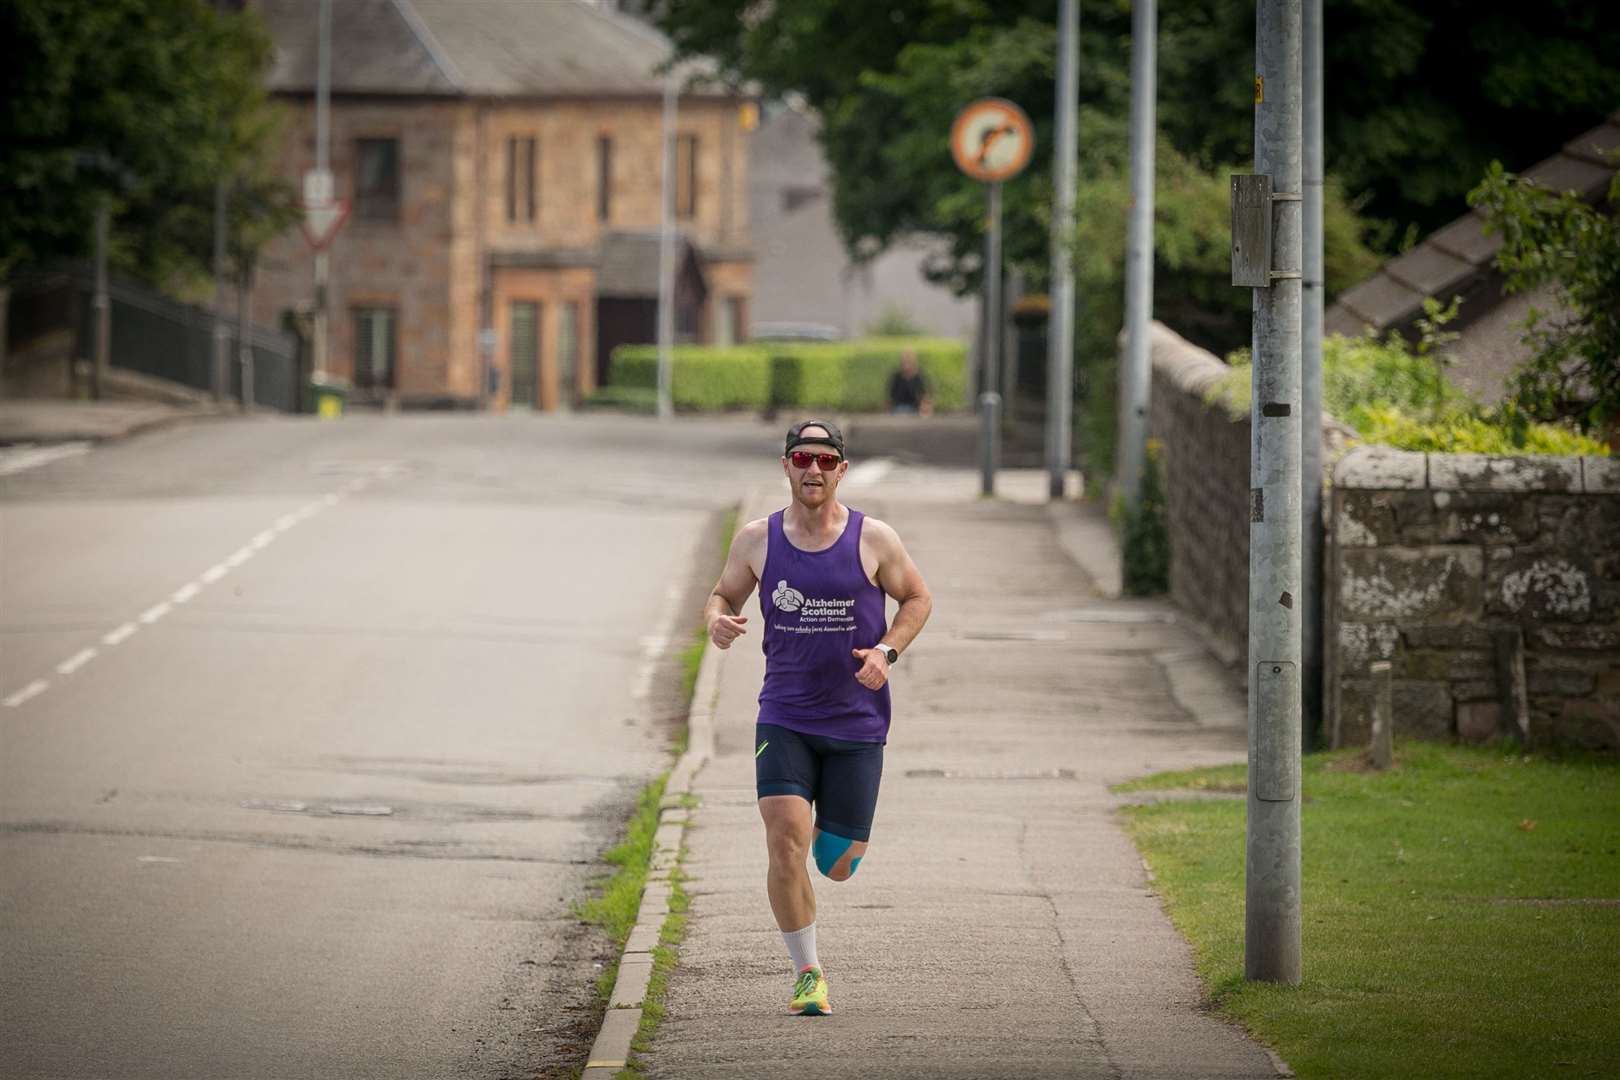 John Mann completed his Tri-7 Challenge, completing seven triathlons in seven days, to raise money for Ross Sutherland Rugby Club and Alzheimer's Scotland. Picture: Peter Carson